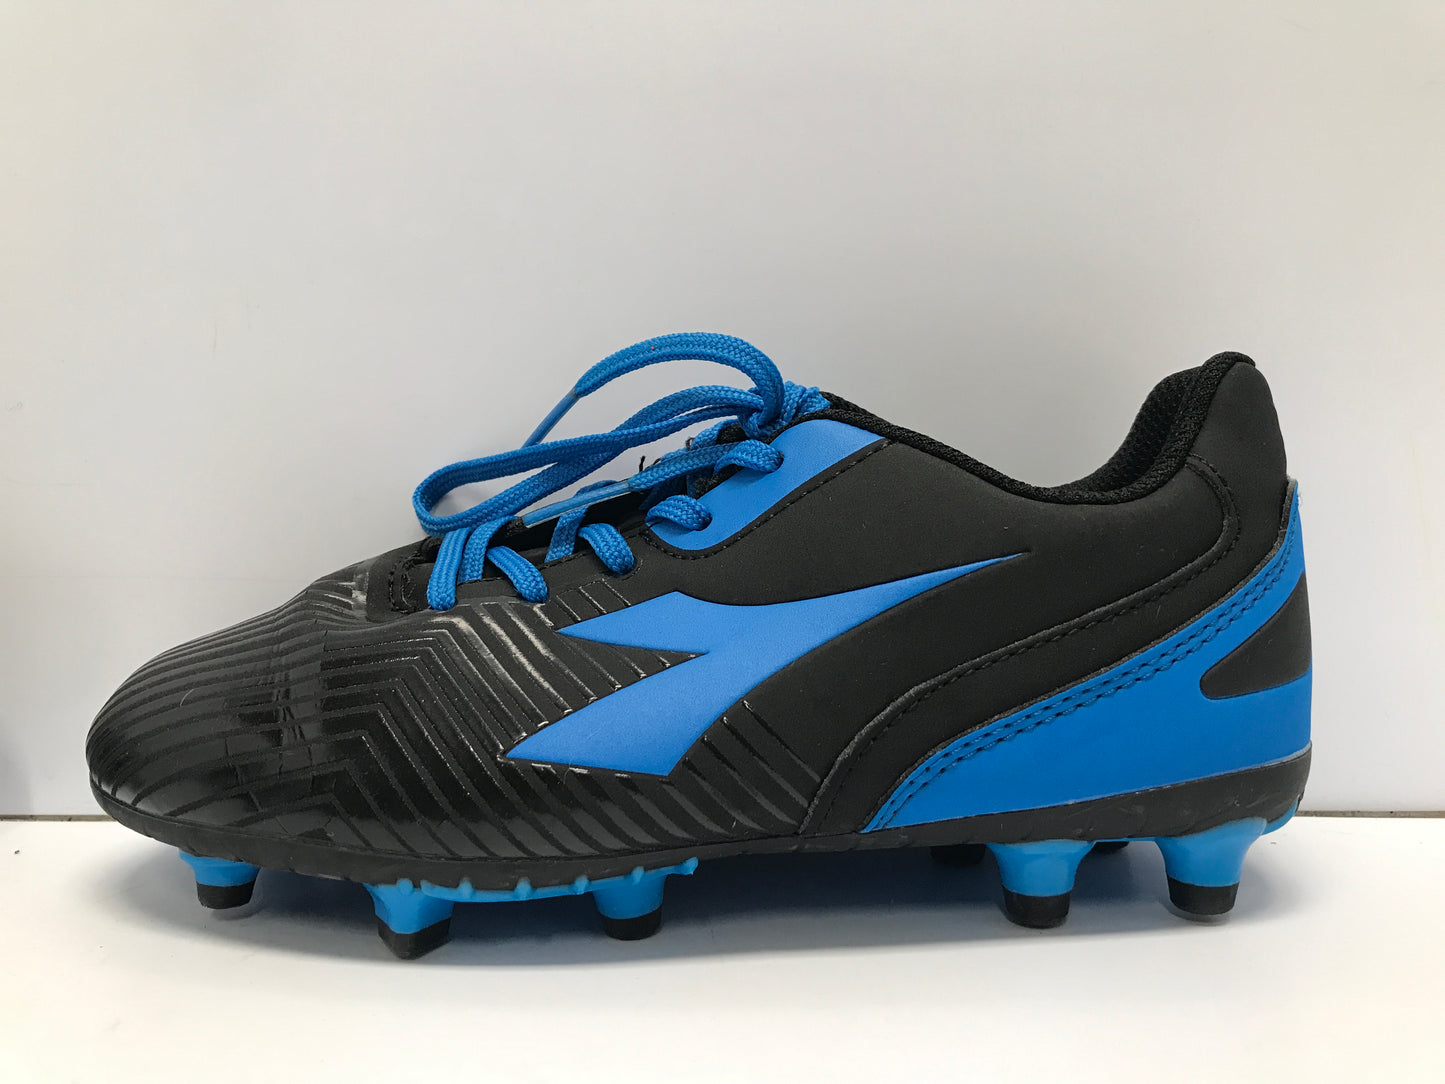 Soccer Shoes Cleats Child Size 2 Diadora Blue Black Like New